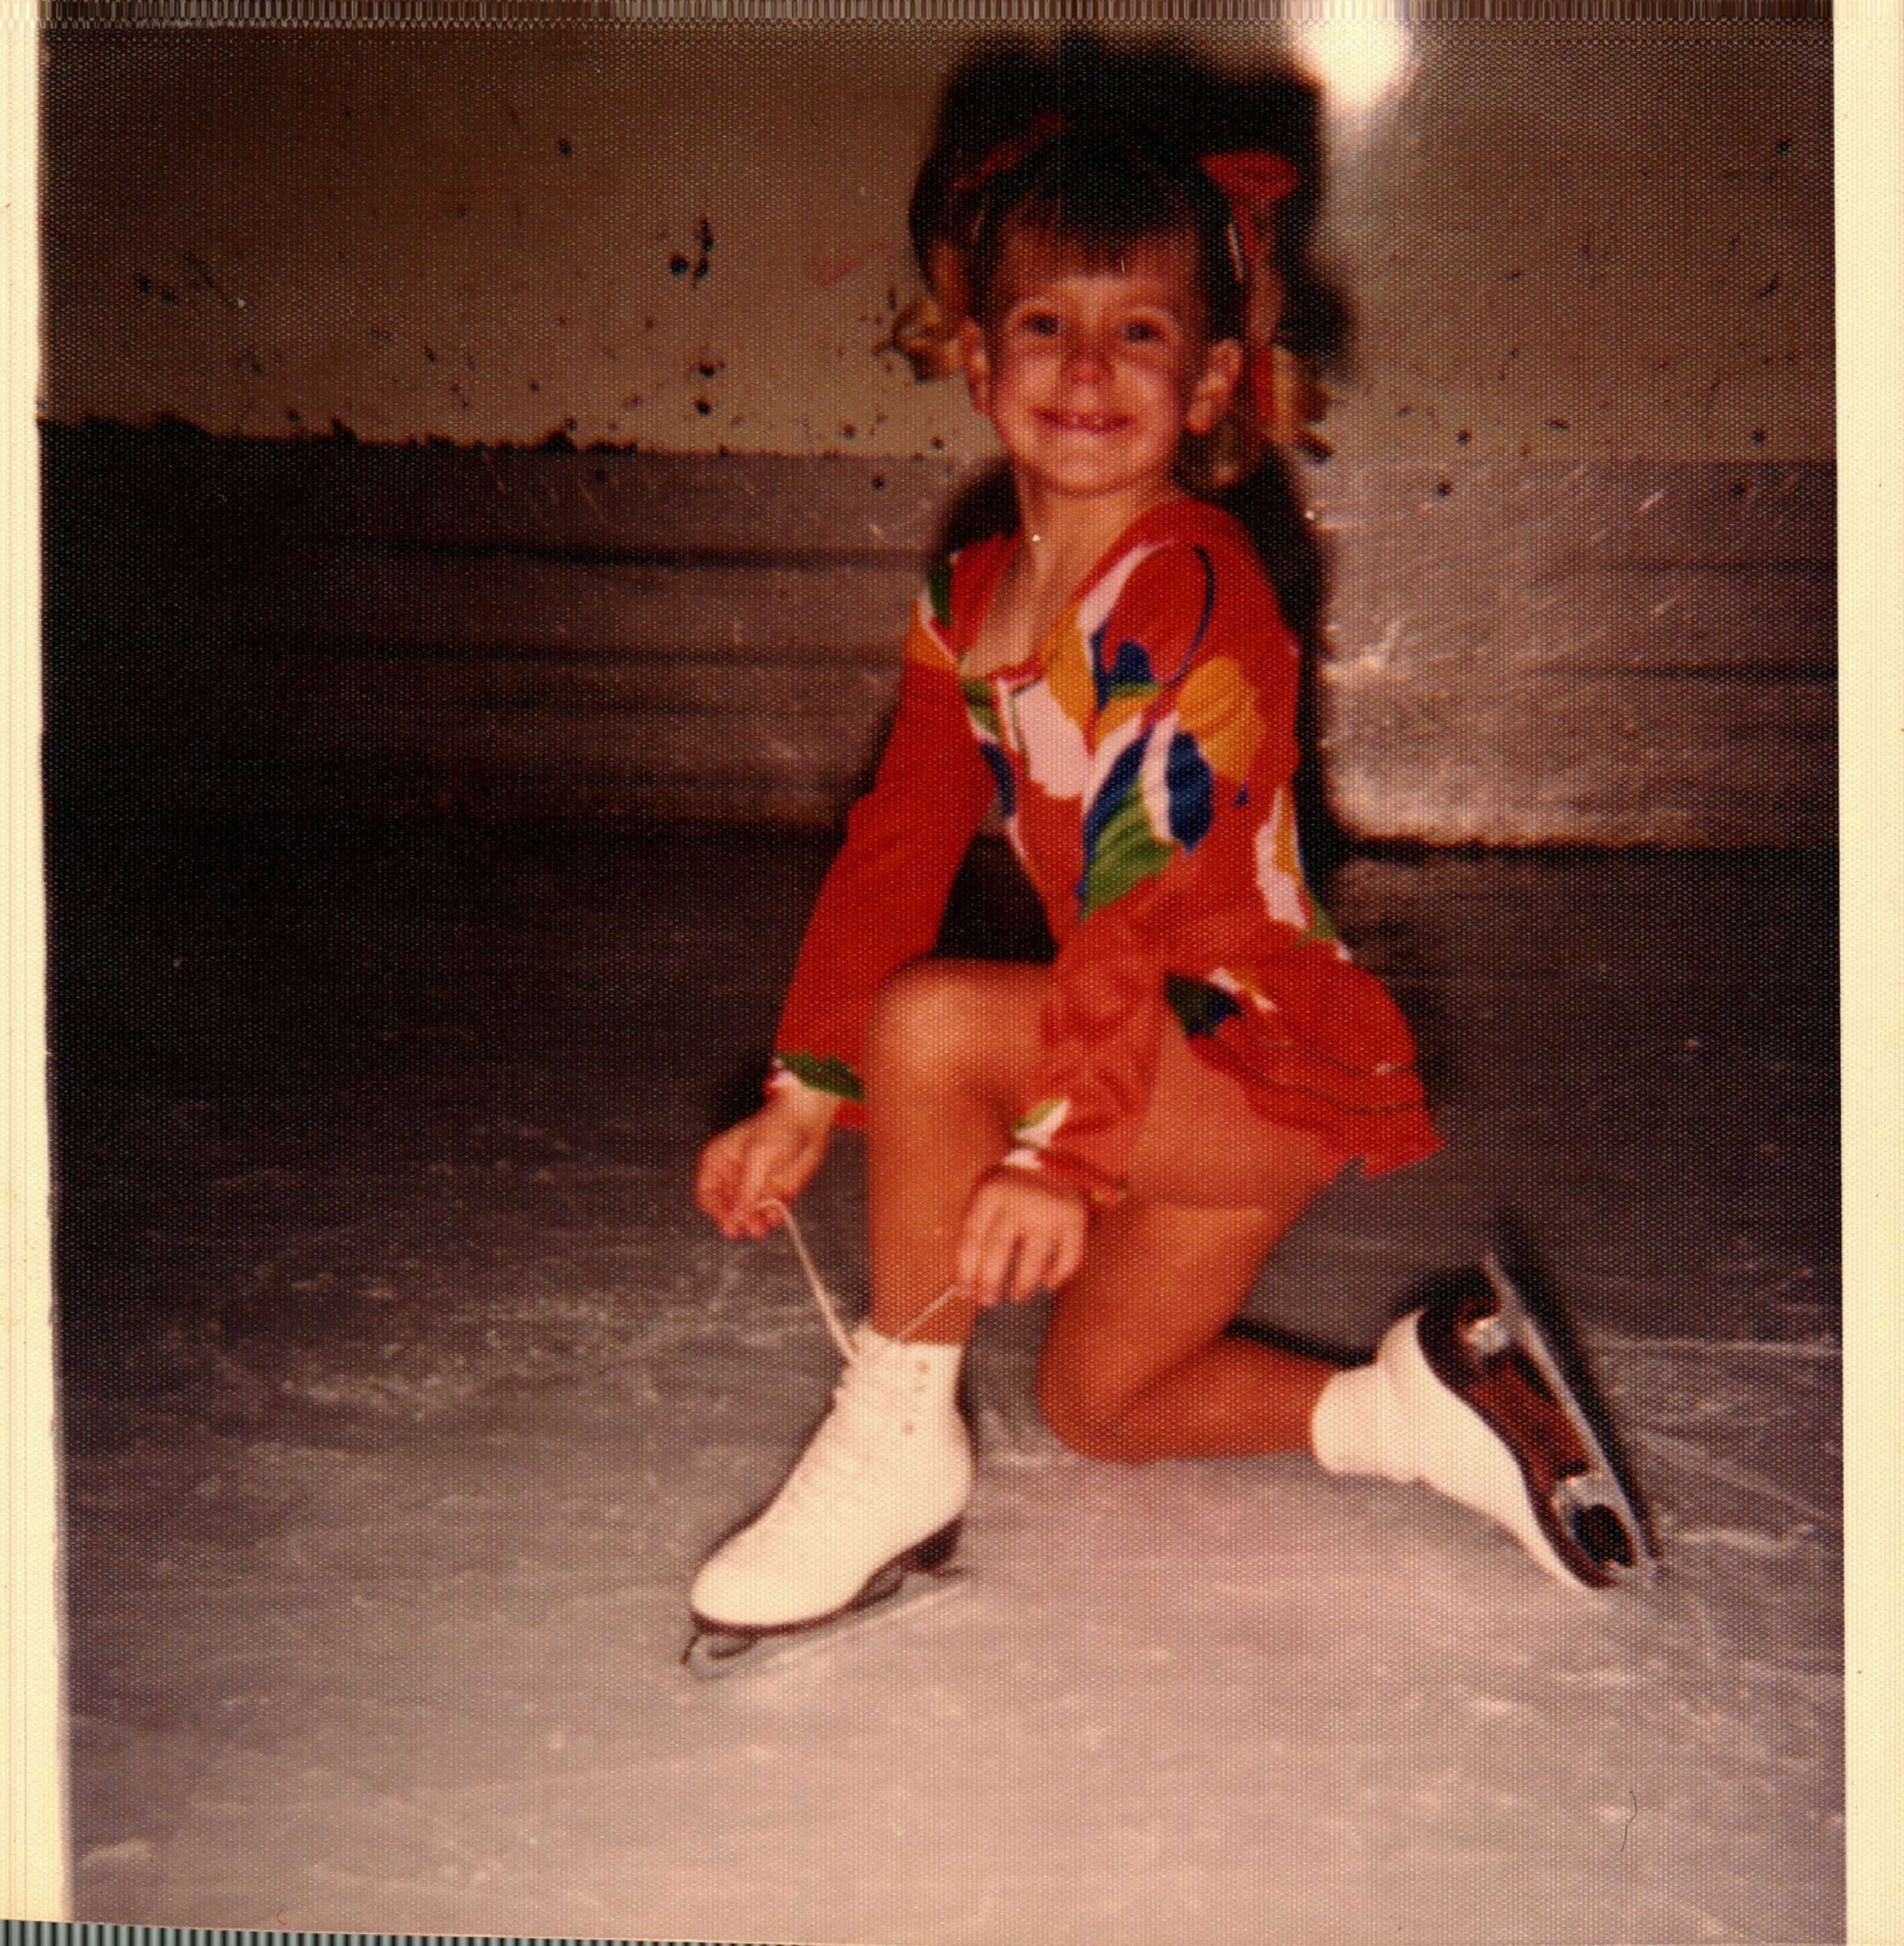 Tonya Harding is seen here tying the laces on her ice skates in this undated family photo.